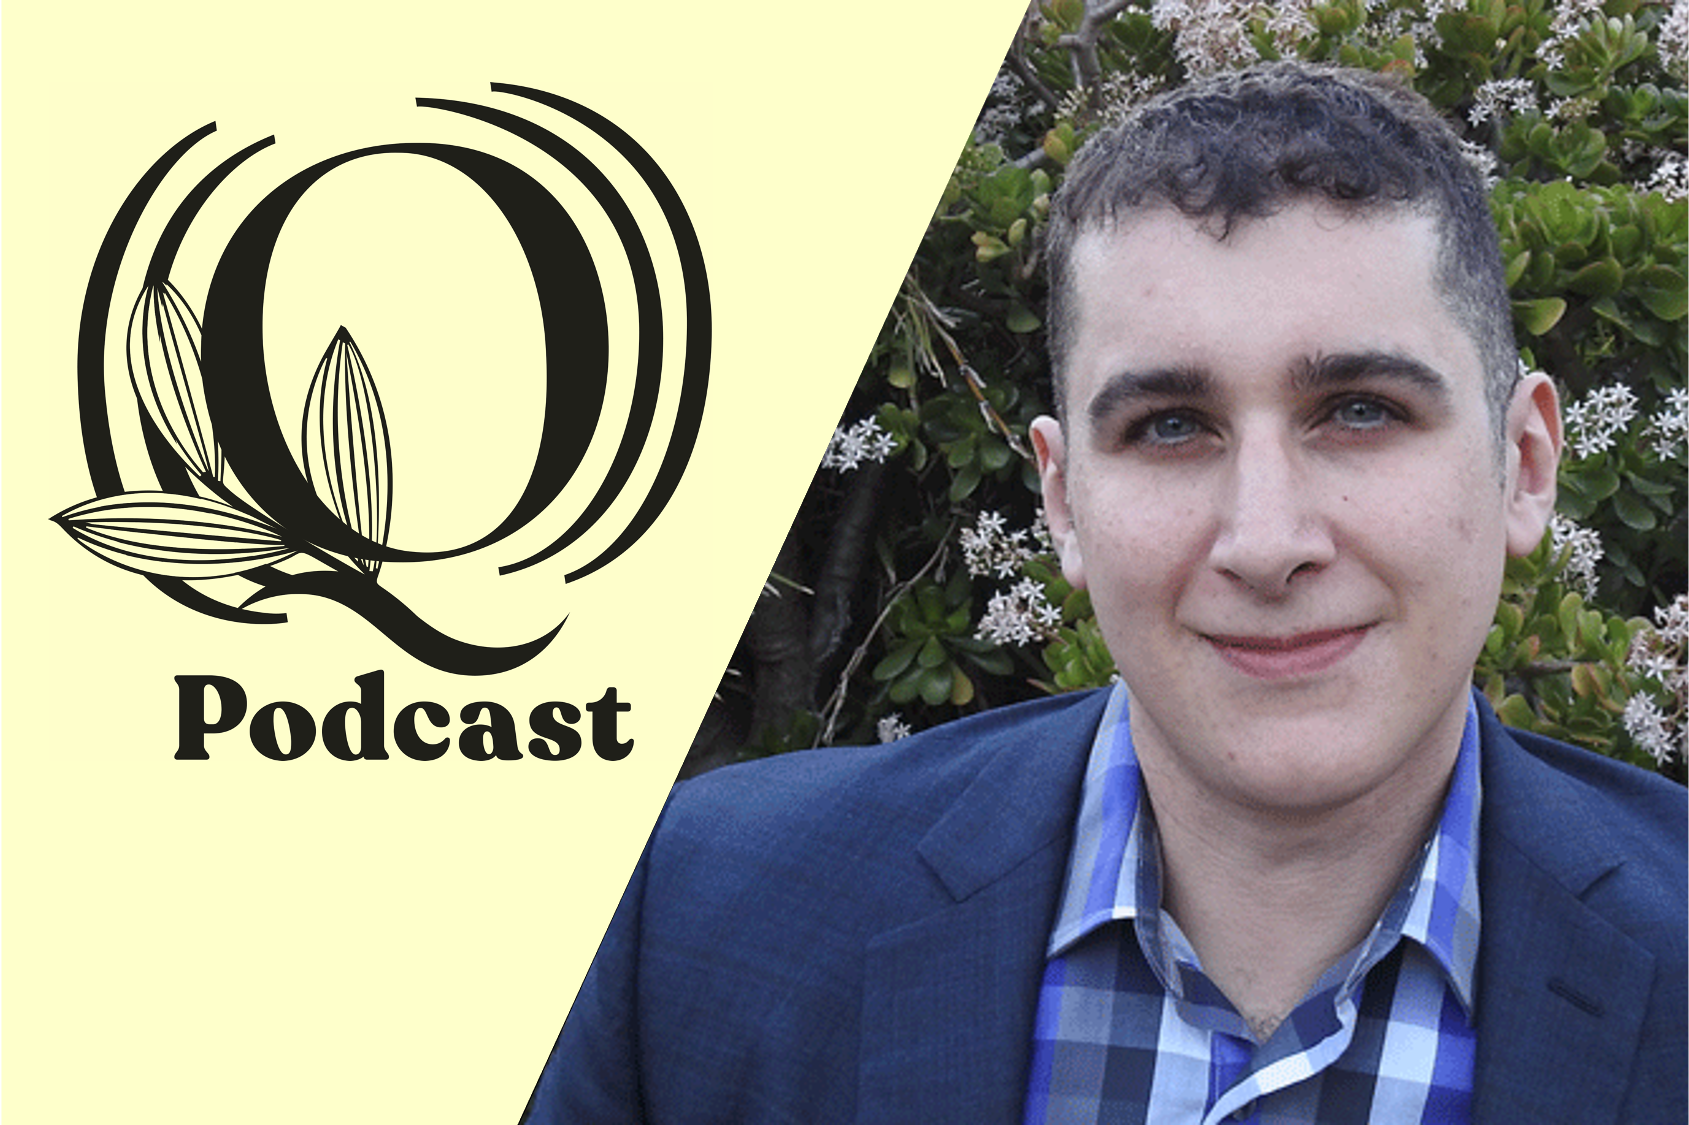 Podcast #147: Richard Hanania on the Real Reason Progressives Are Winning the Culture War: They Just Want It More